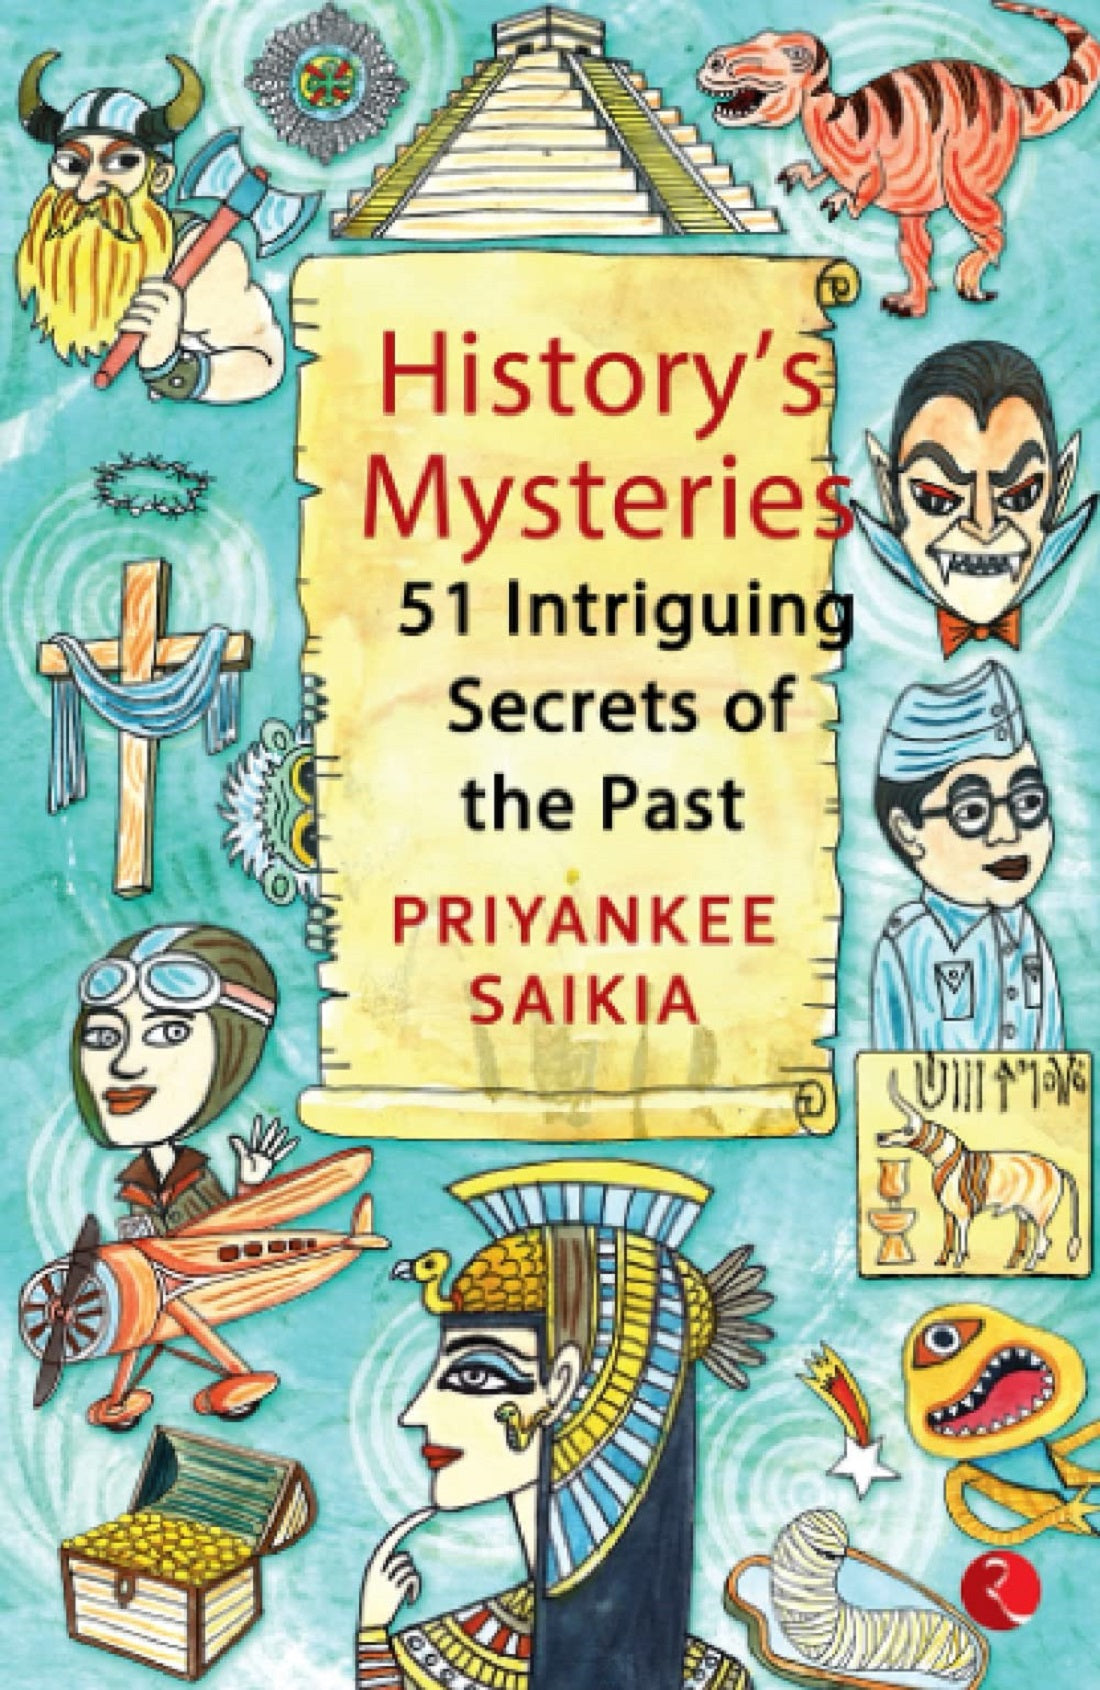 HISTORY'S MYSTERIES 51 INTRIGUING SECRETS OF THE PAST